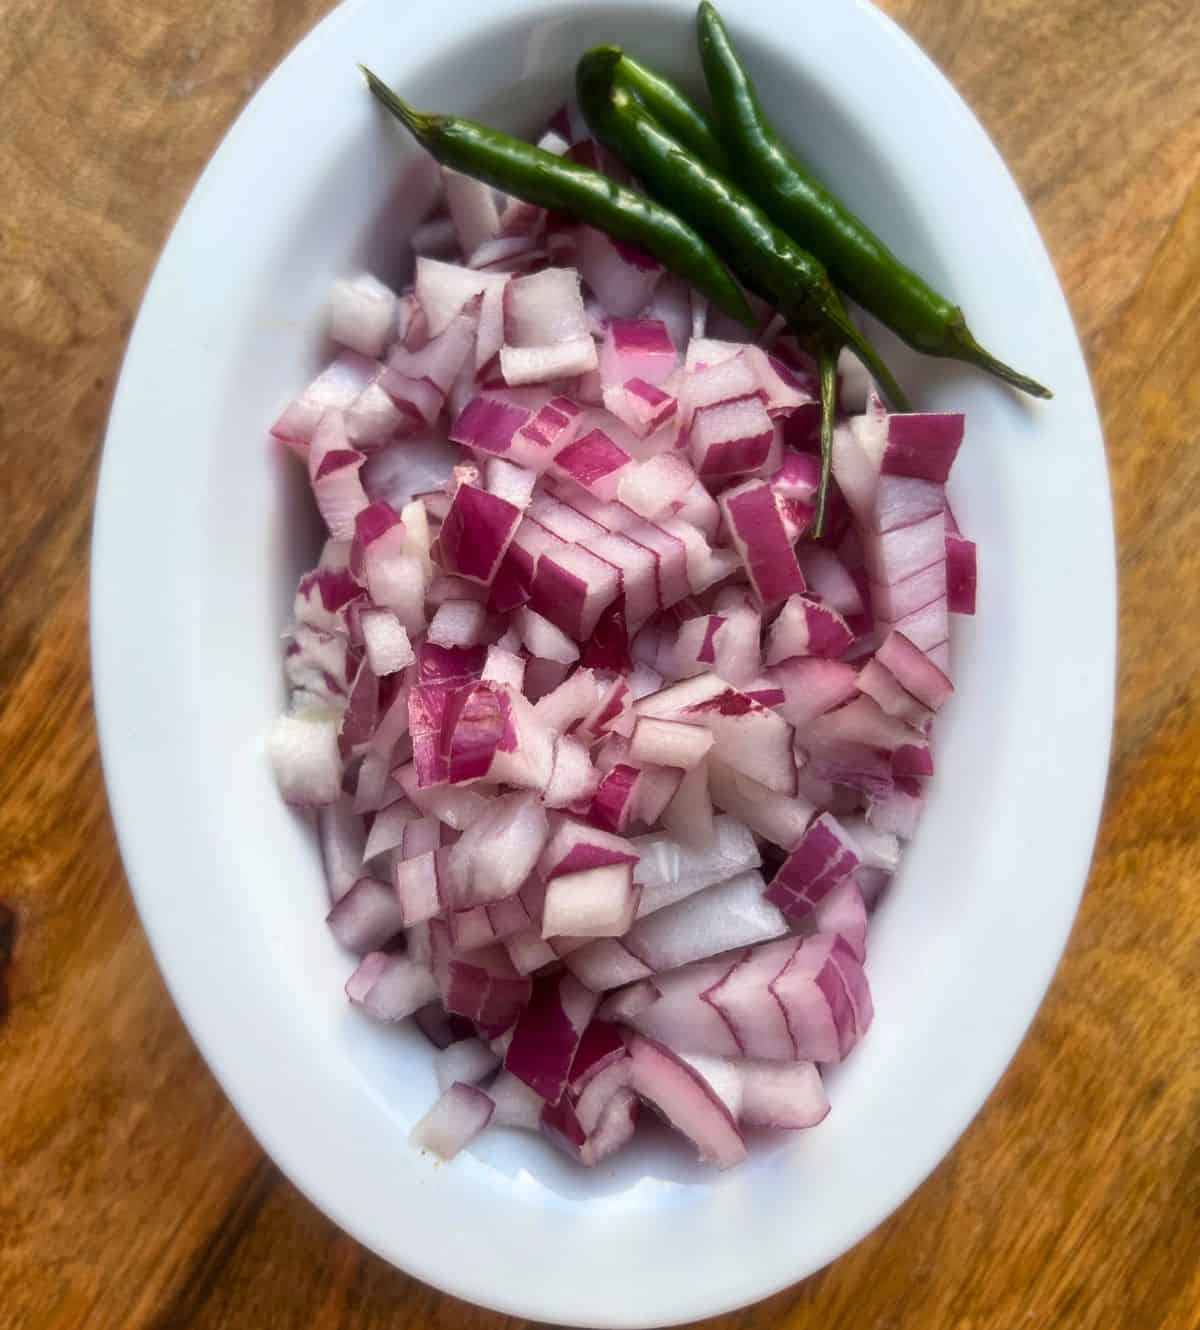 Chopped onion and whole green chillies in a small white bowl.